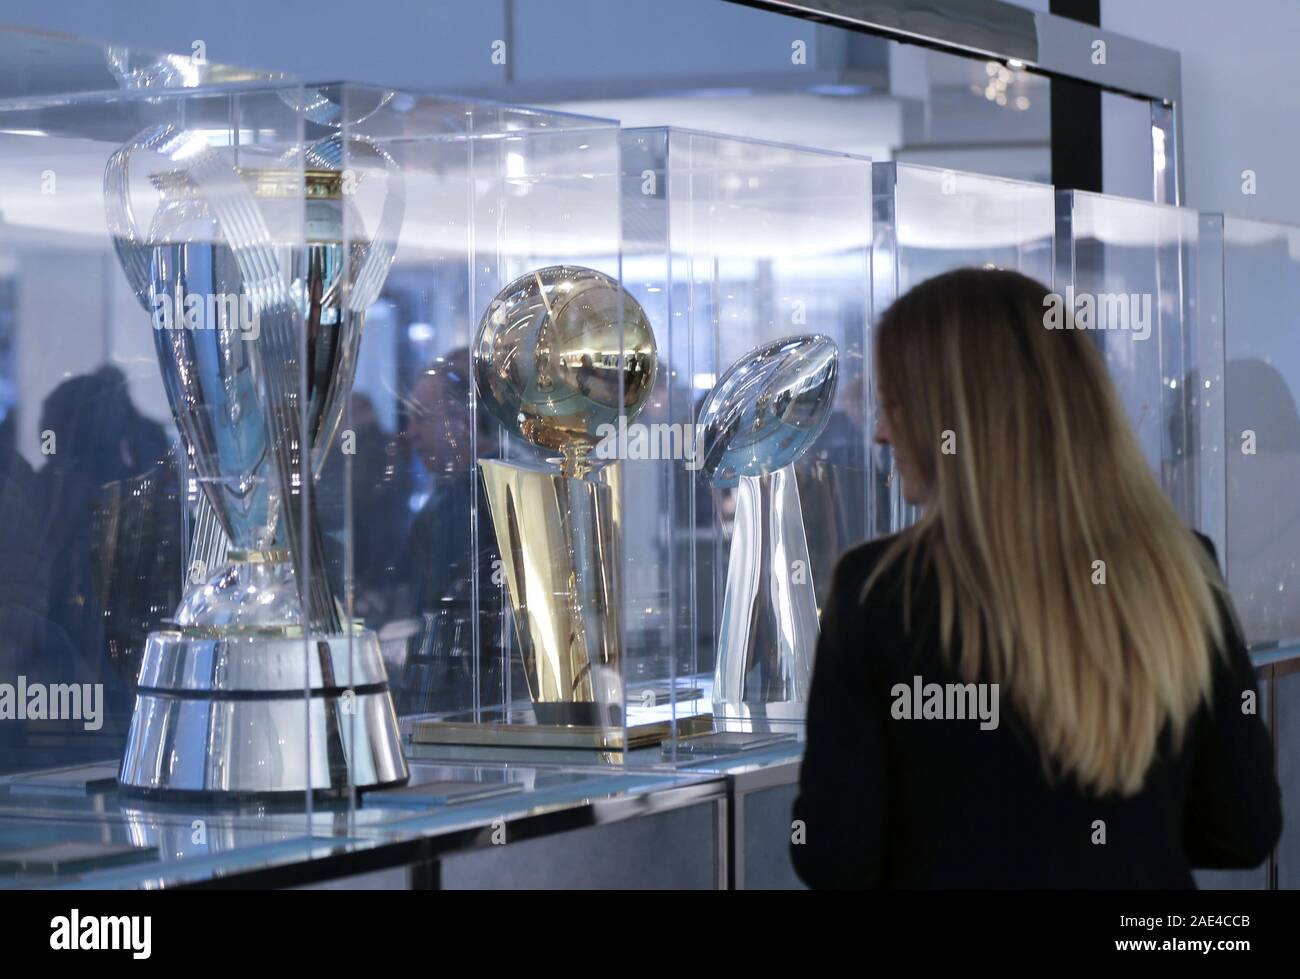 Lakers Championship Trophy Display At Louis Vuitton